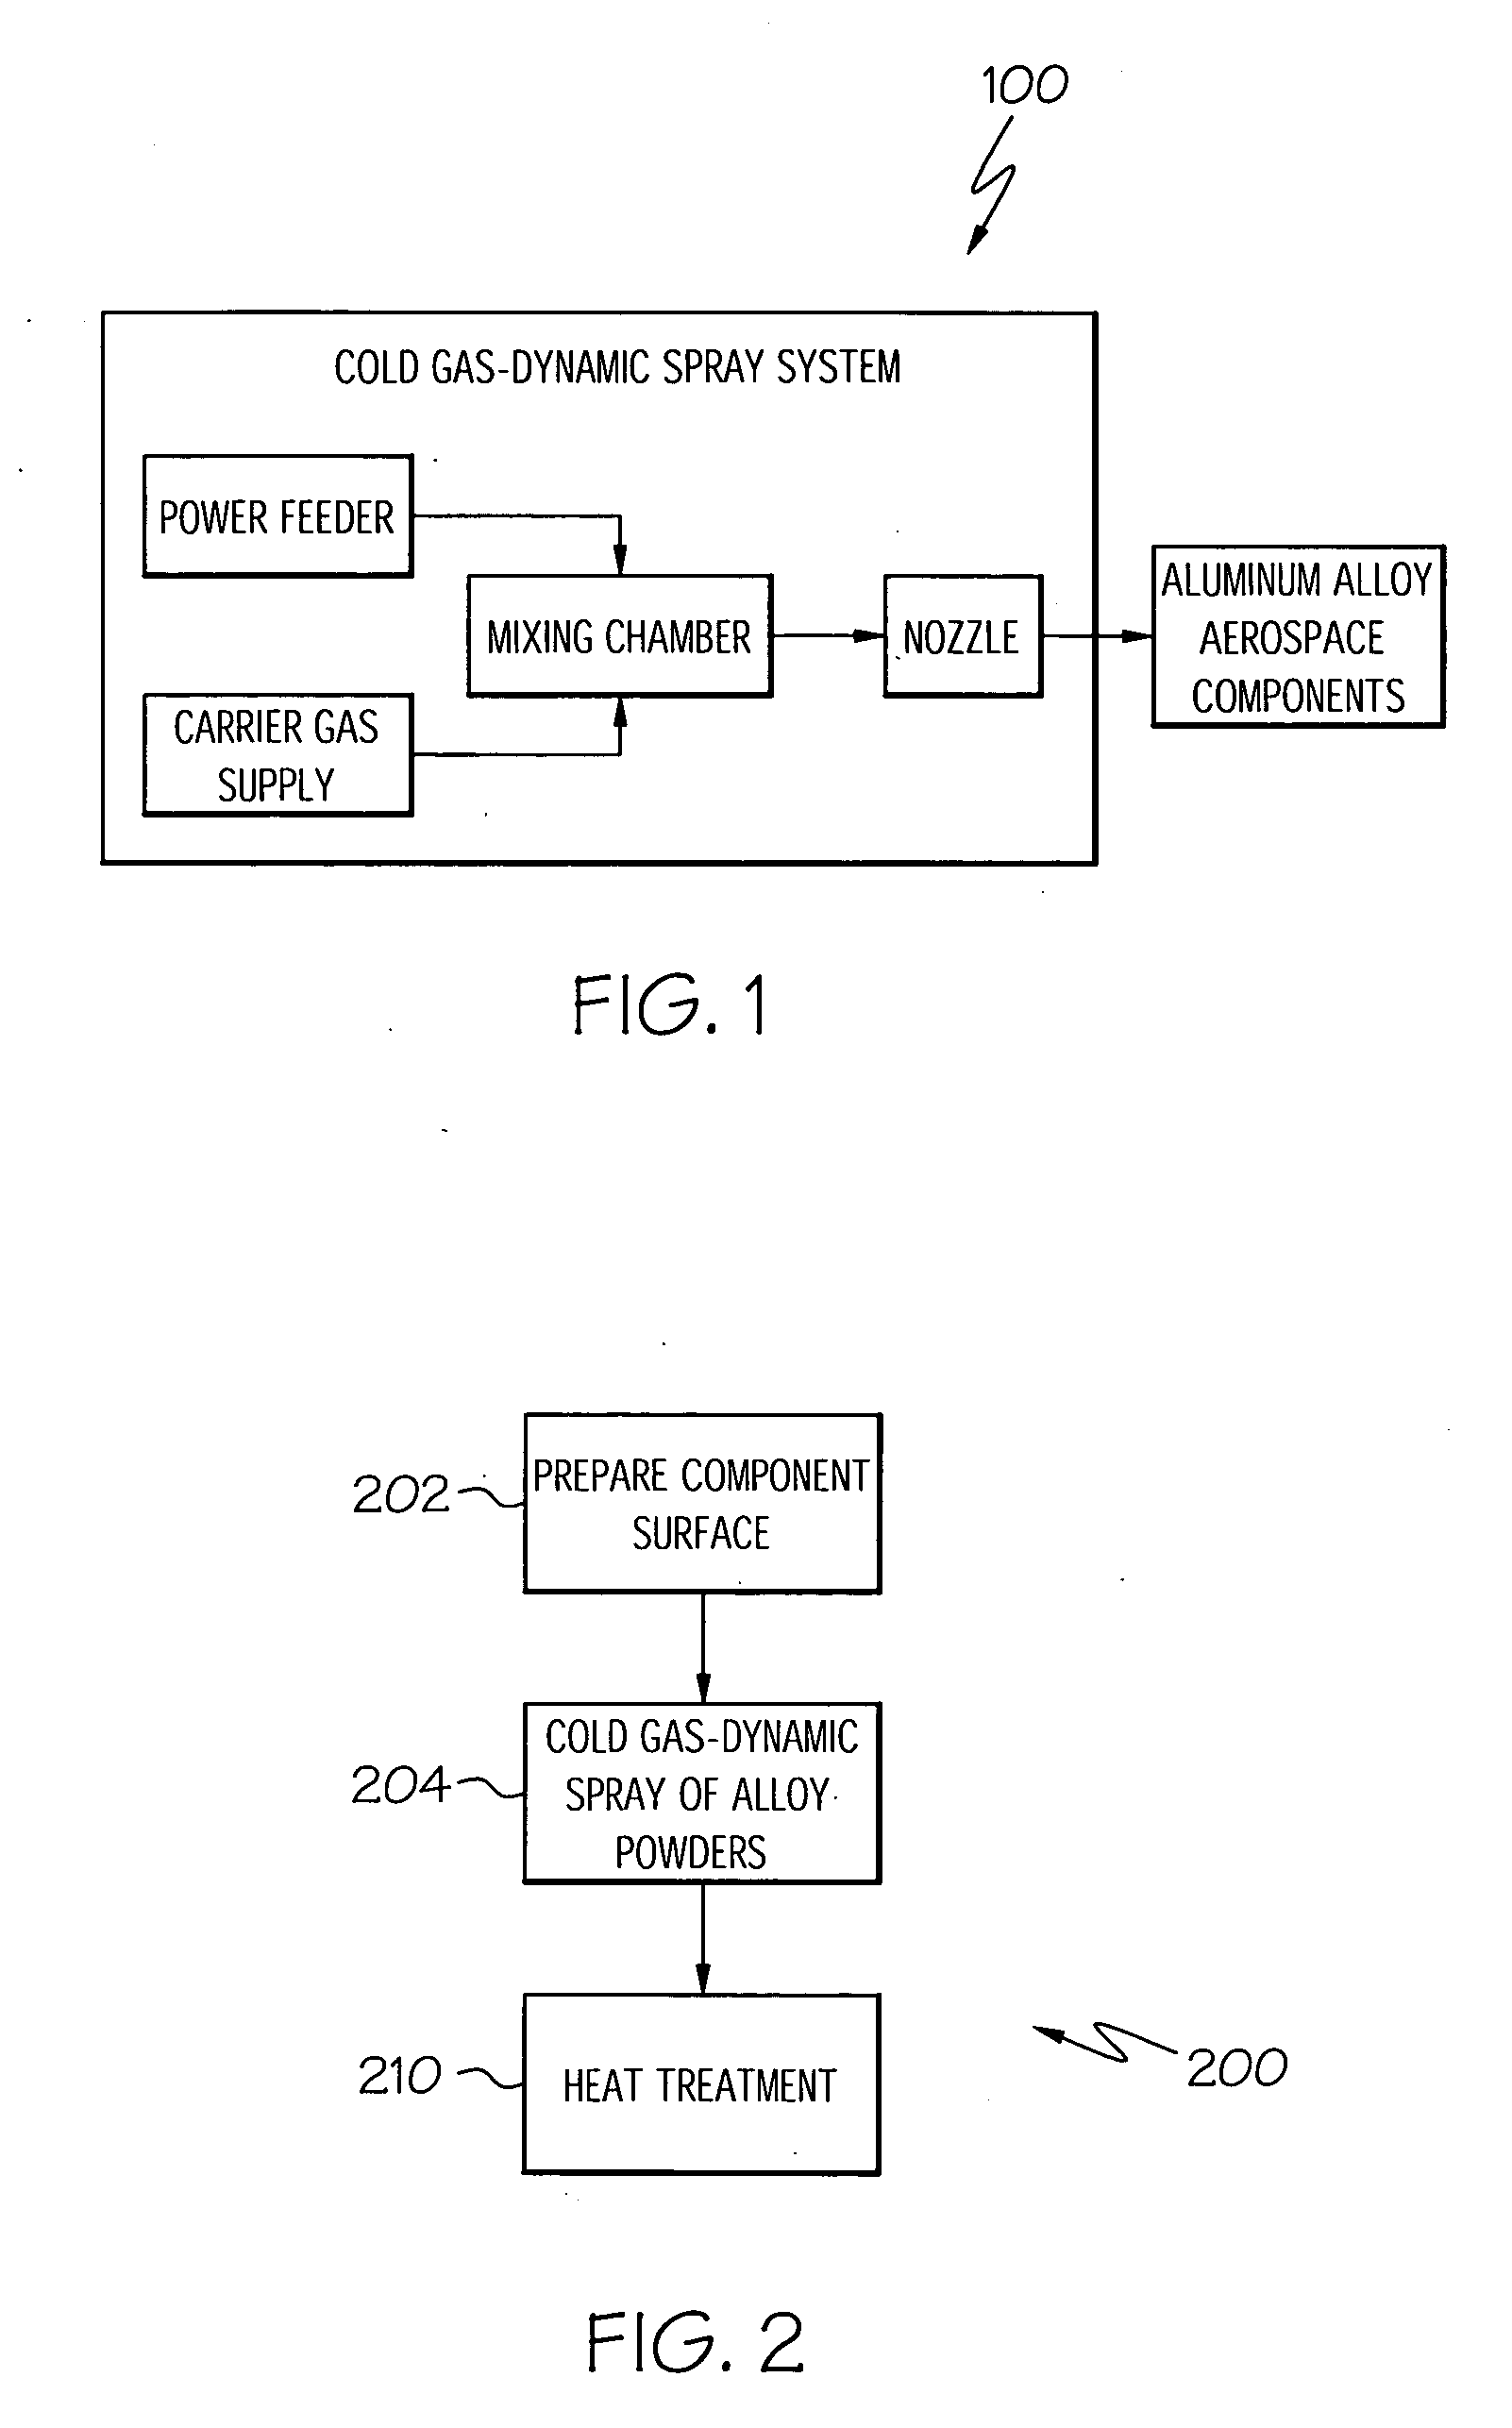 Aluminum articles with wear-resistant coatings and methods for applying the coatings onto the articles